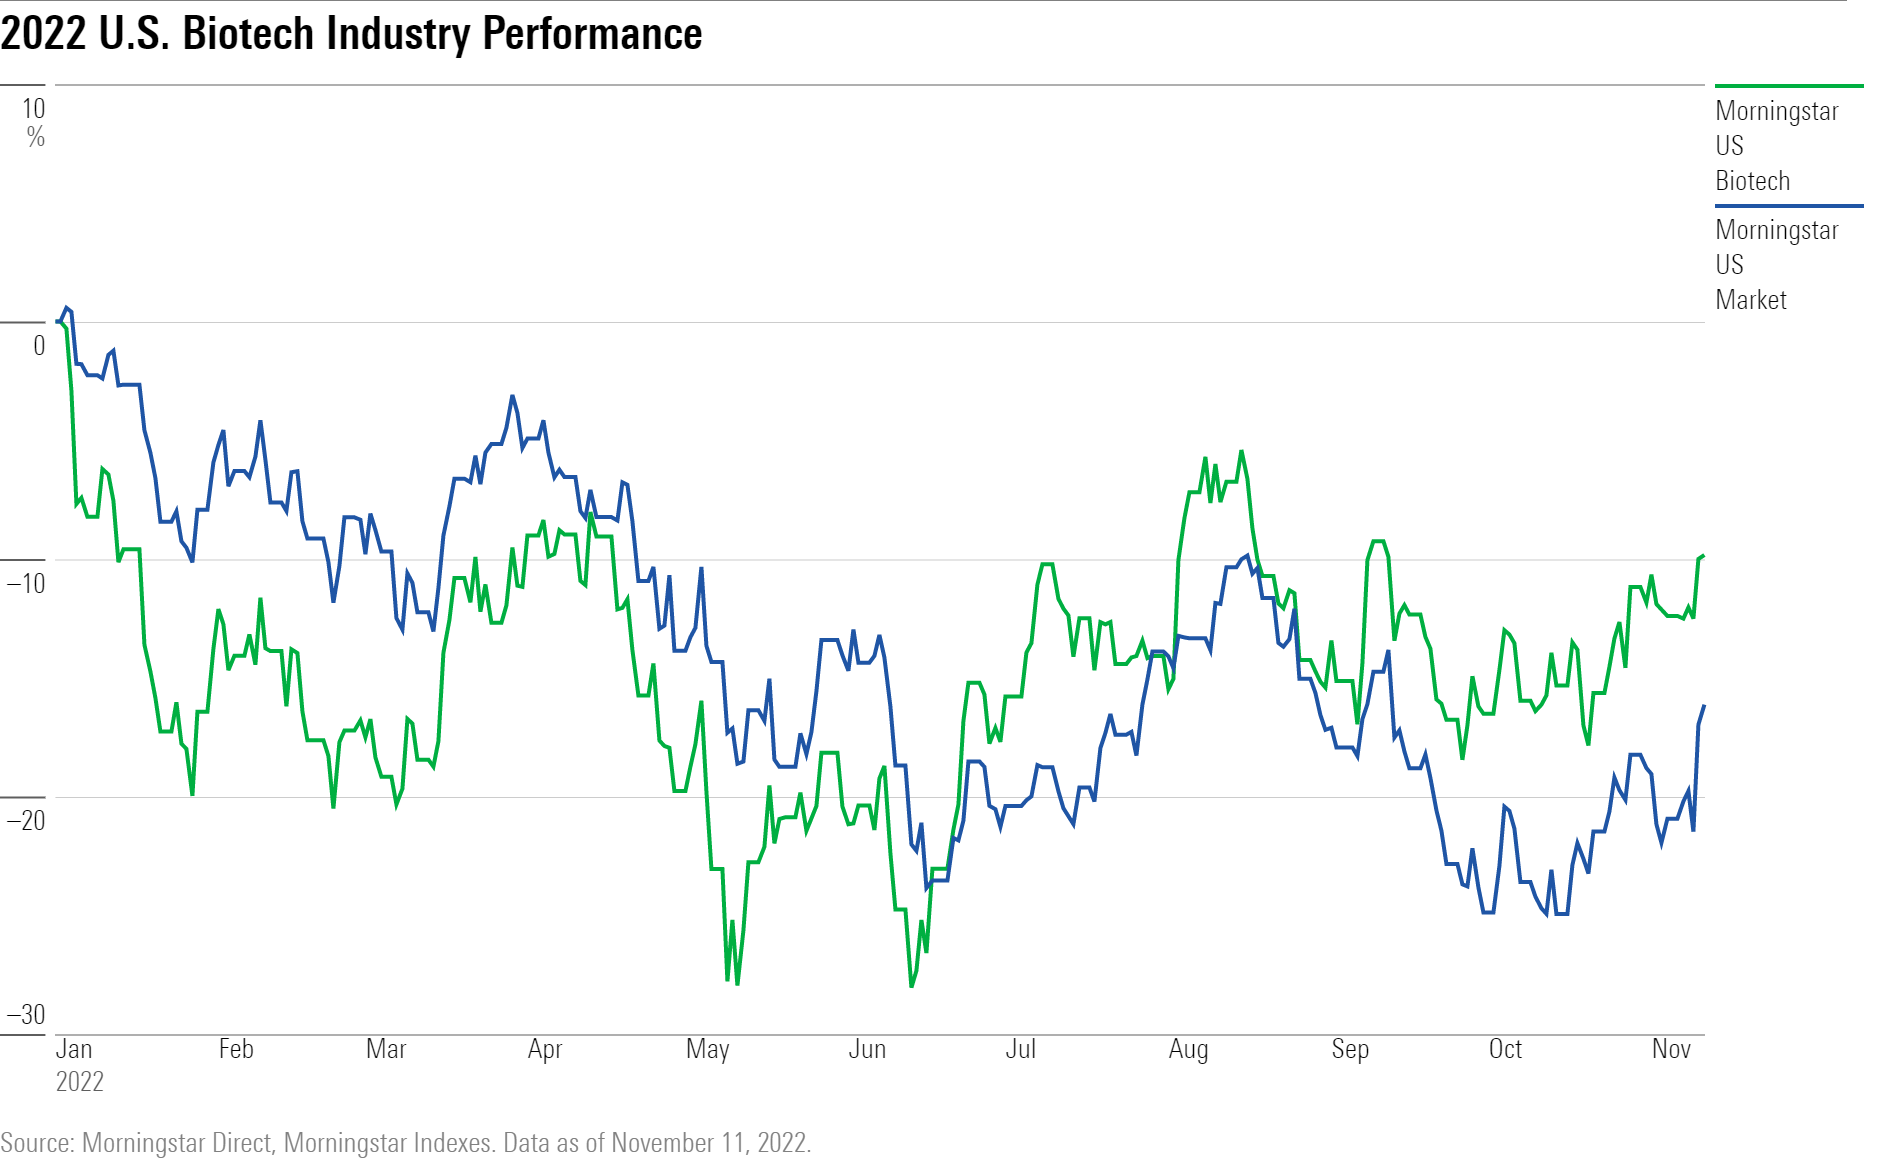 Line chart showing 2022 performance of the Morningstar US Biotech index.